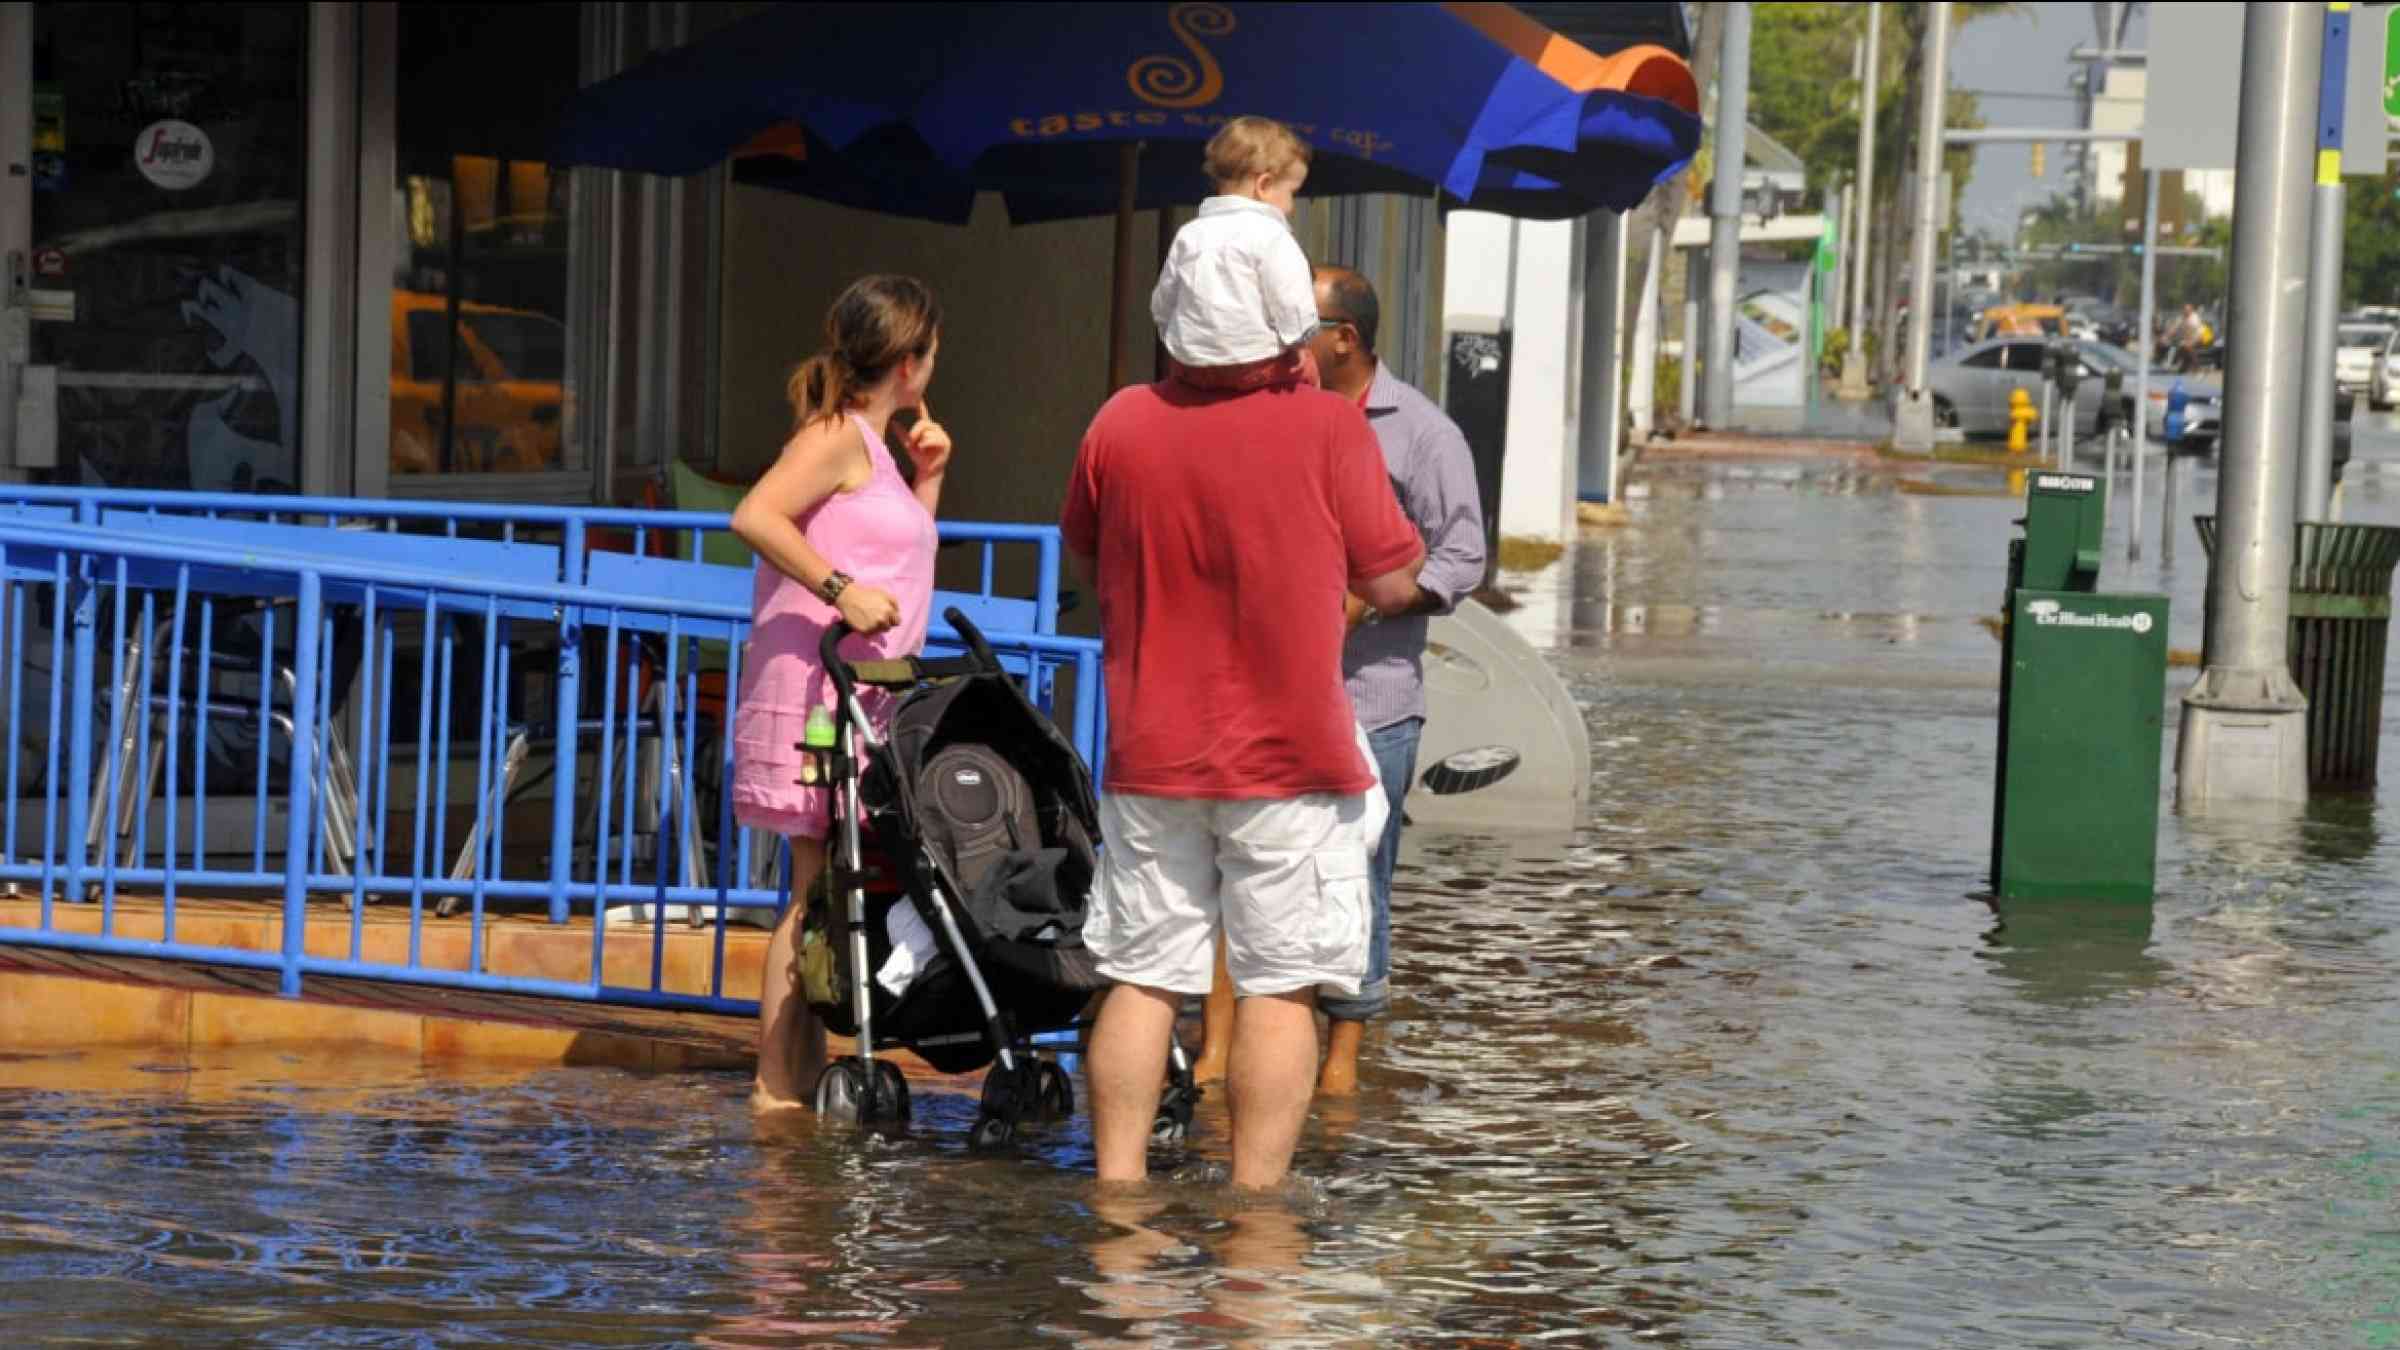 Family with a baby in the midst of a flooded street following Hurricane Sandy, in Miami (USA) in 2012.